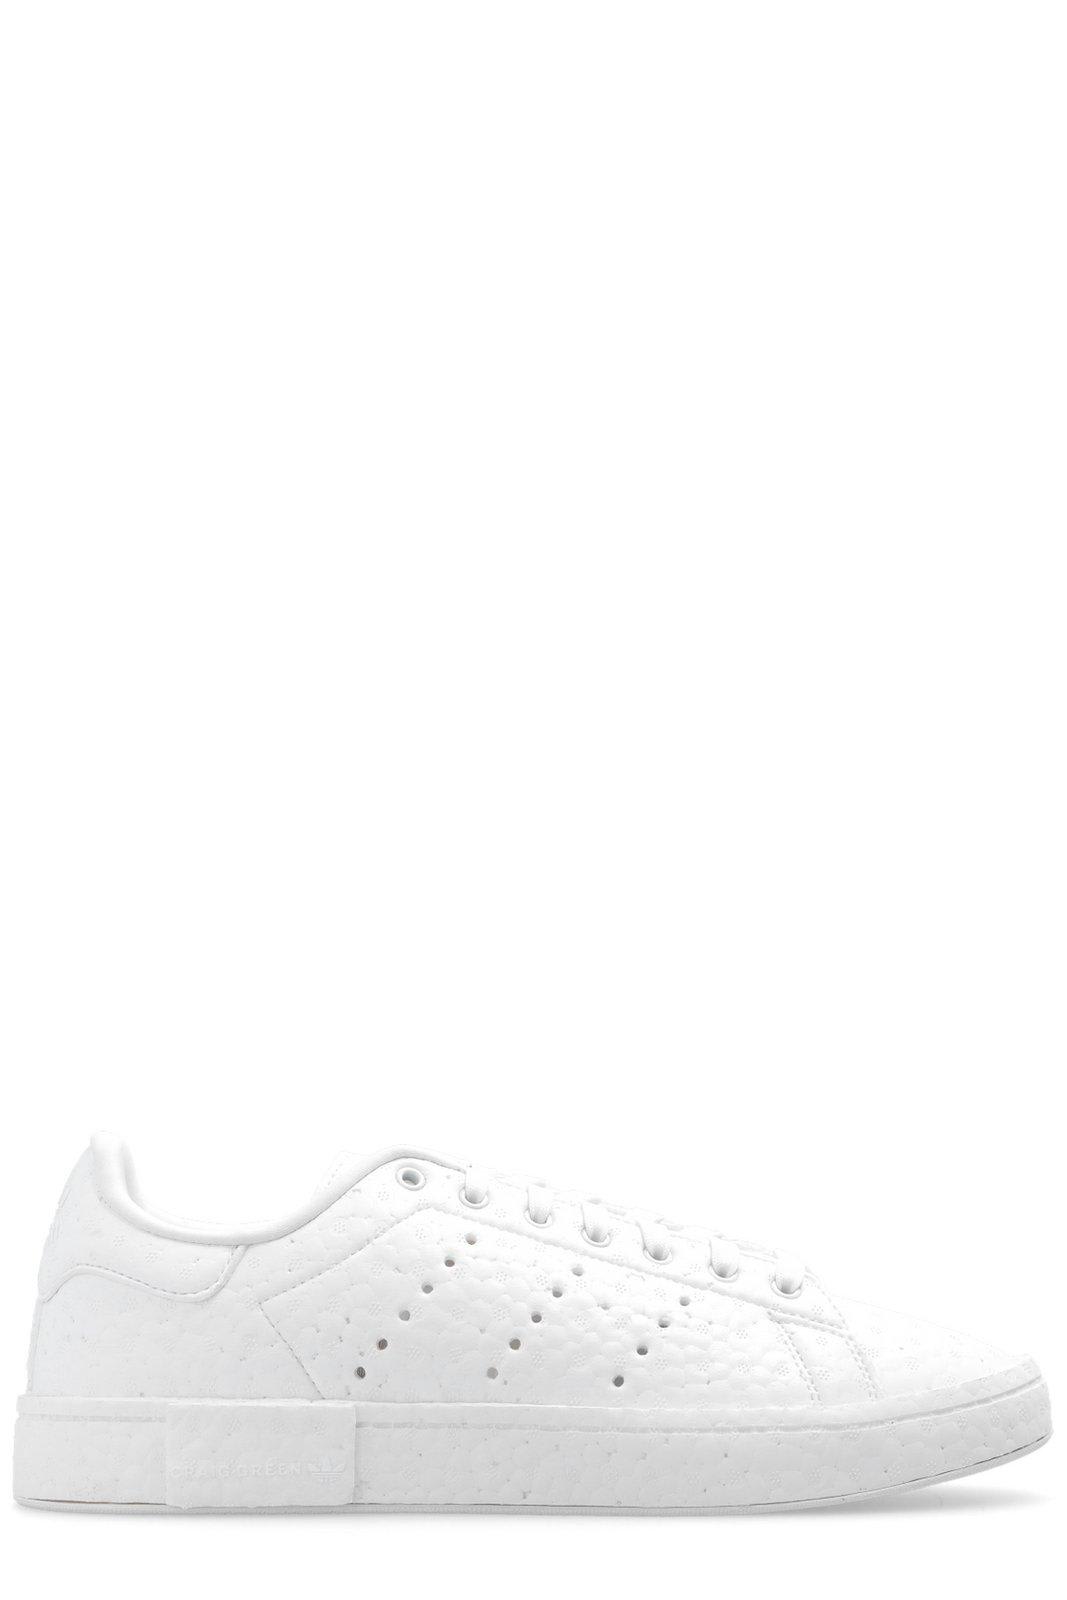 Adidas Originals by Craig Green X Craig Green Stan Smith Lace-up Sneakers - WHITE - male - Size: 8